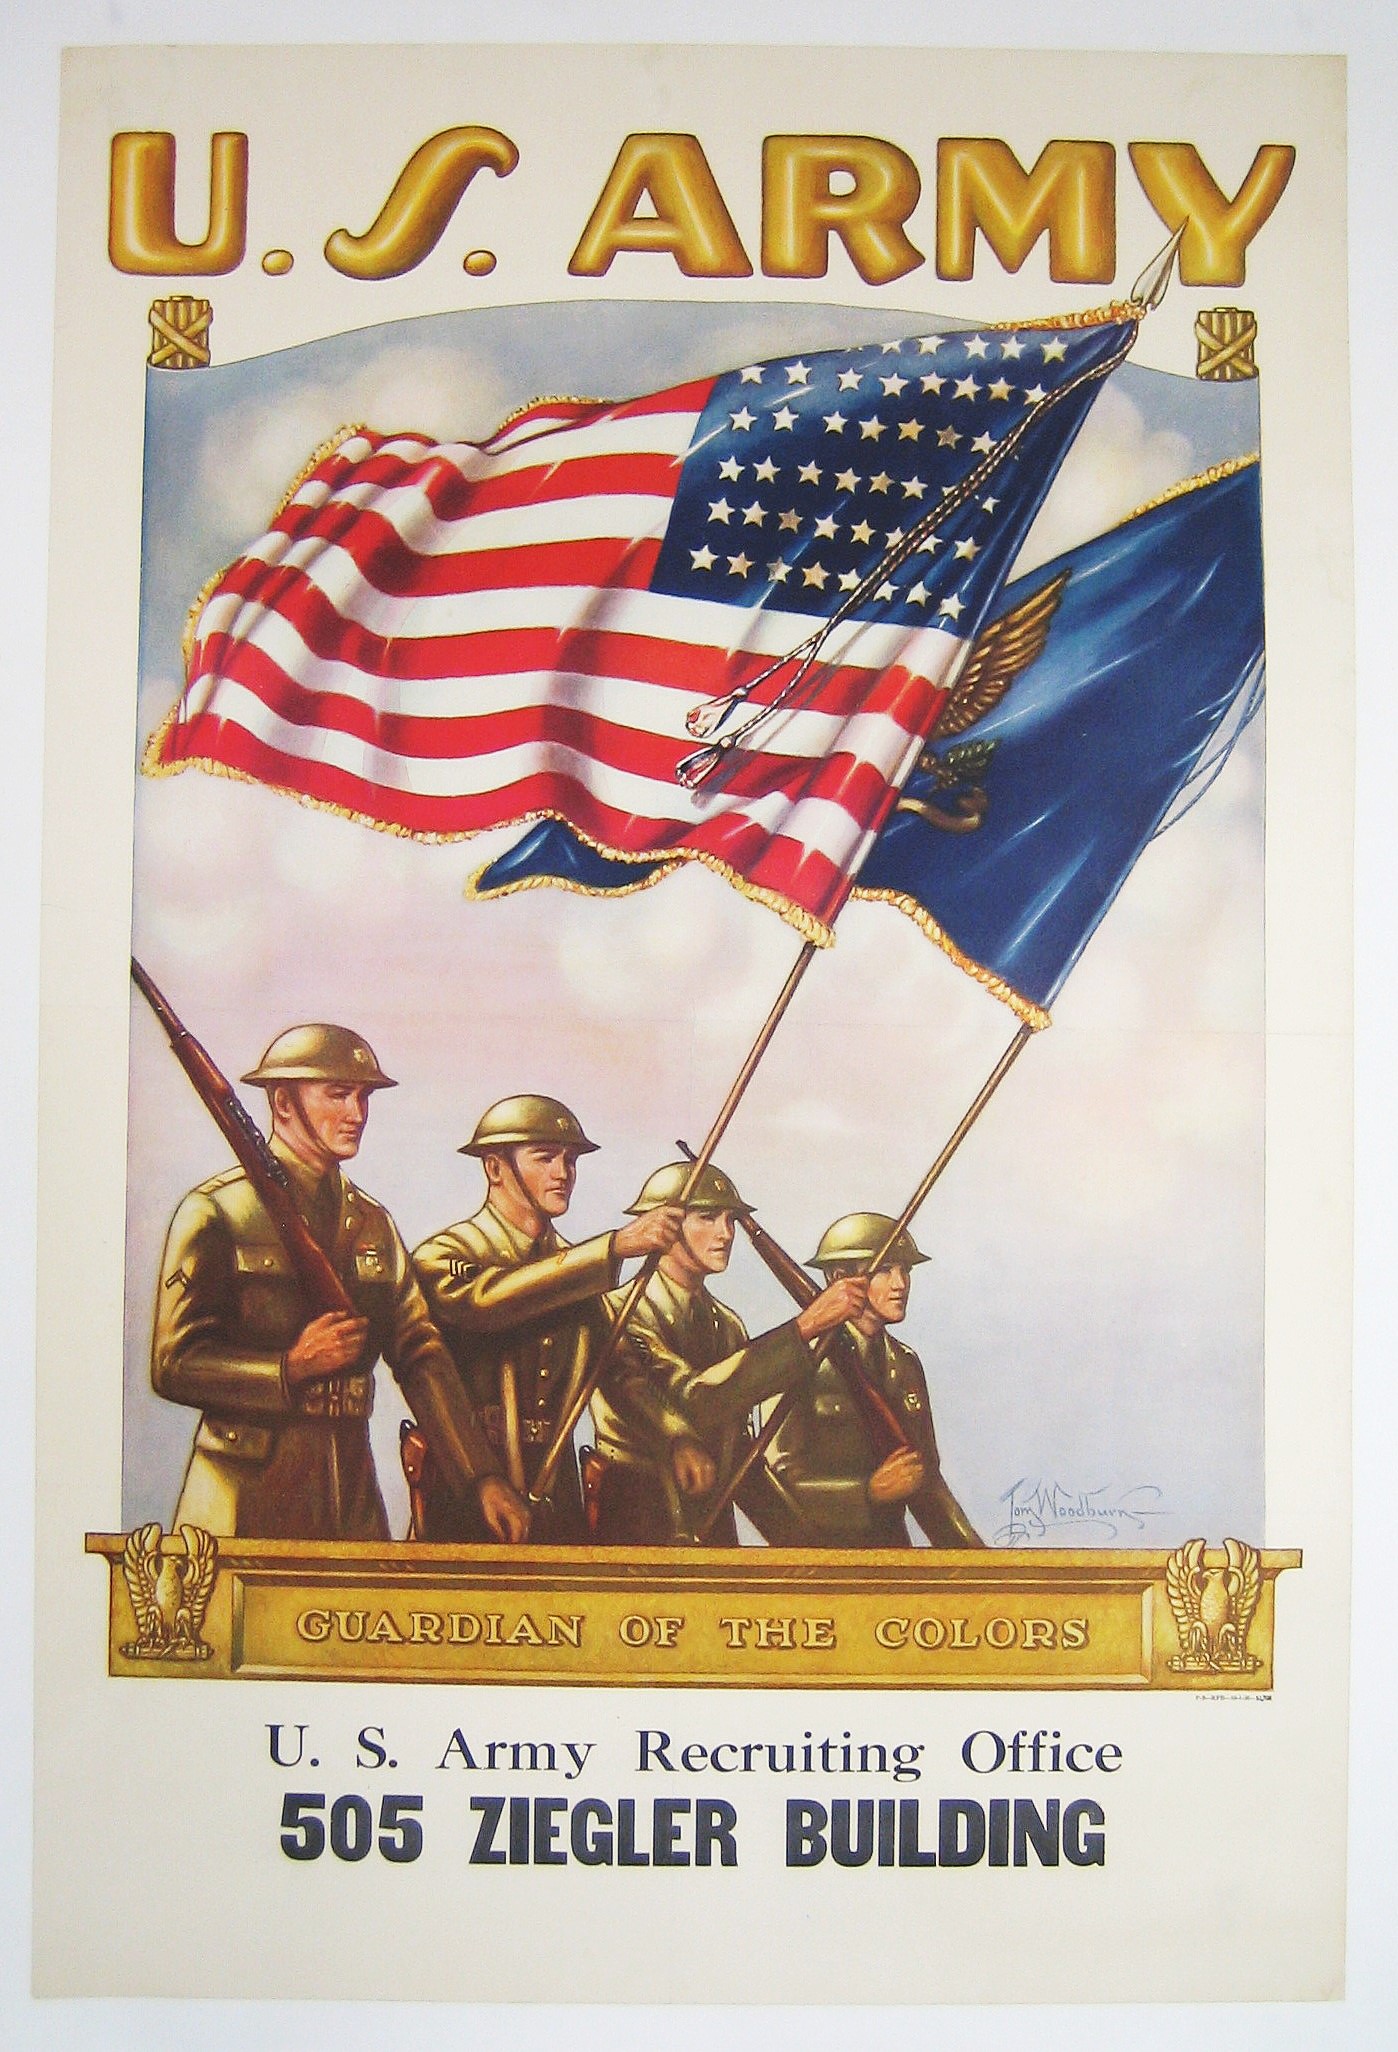 Binder, Joseph: Labor Step into This Picture – Meehan Military Posters